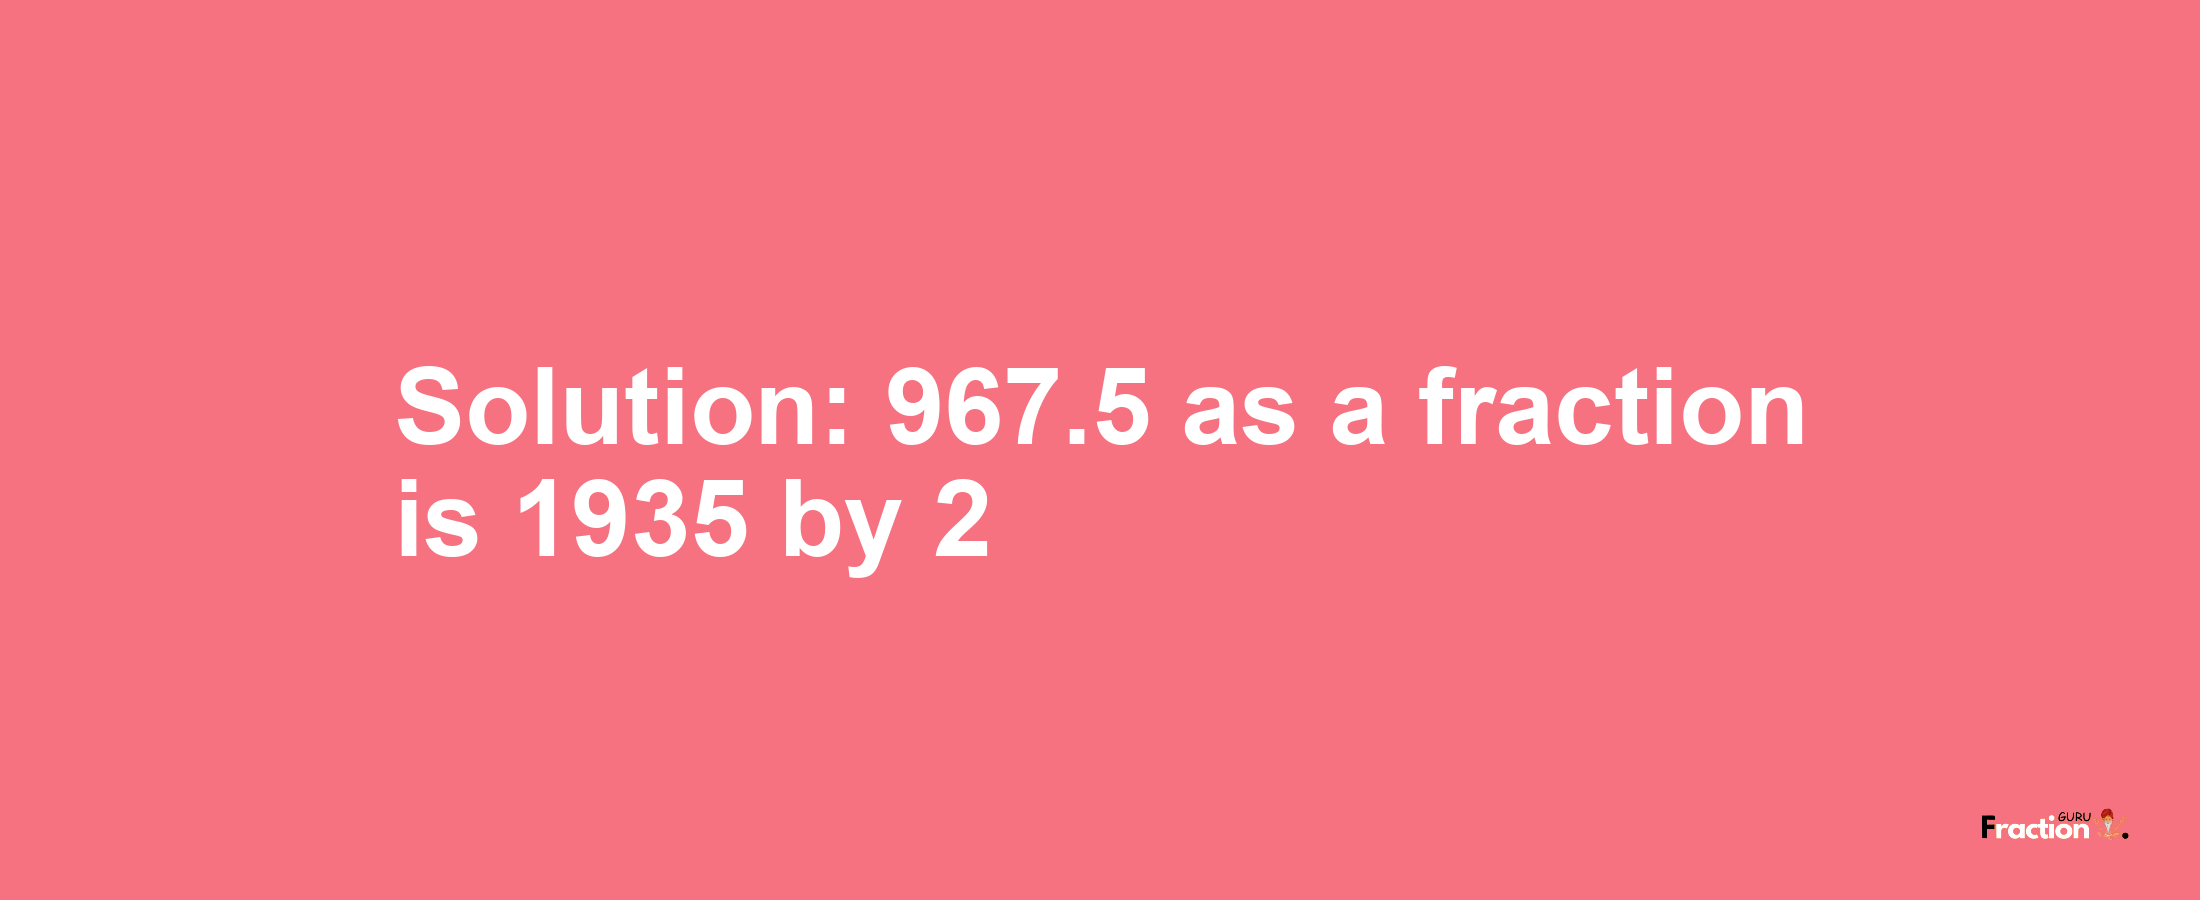 Solution:967.5 as a fraction is 1935/2